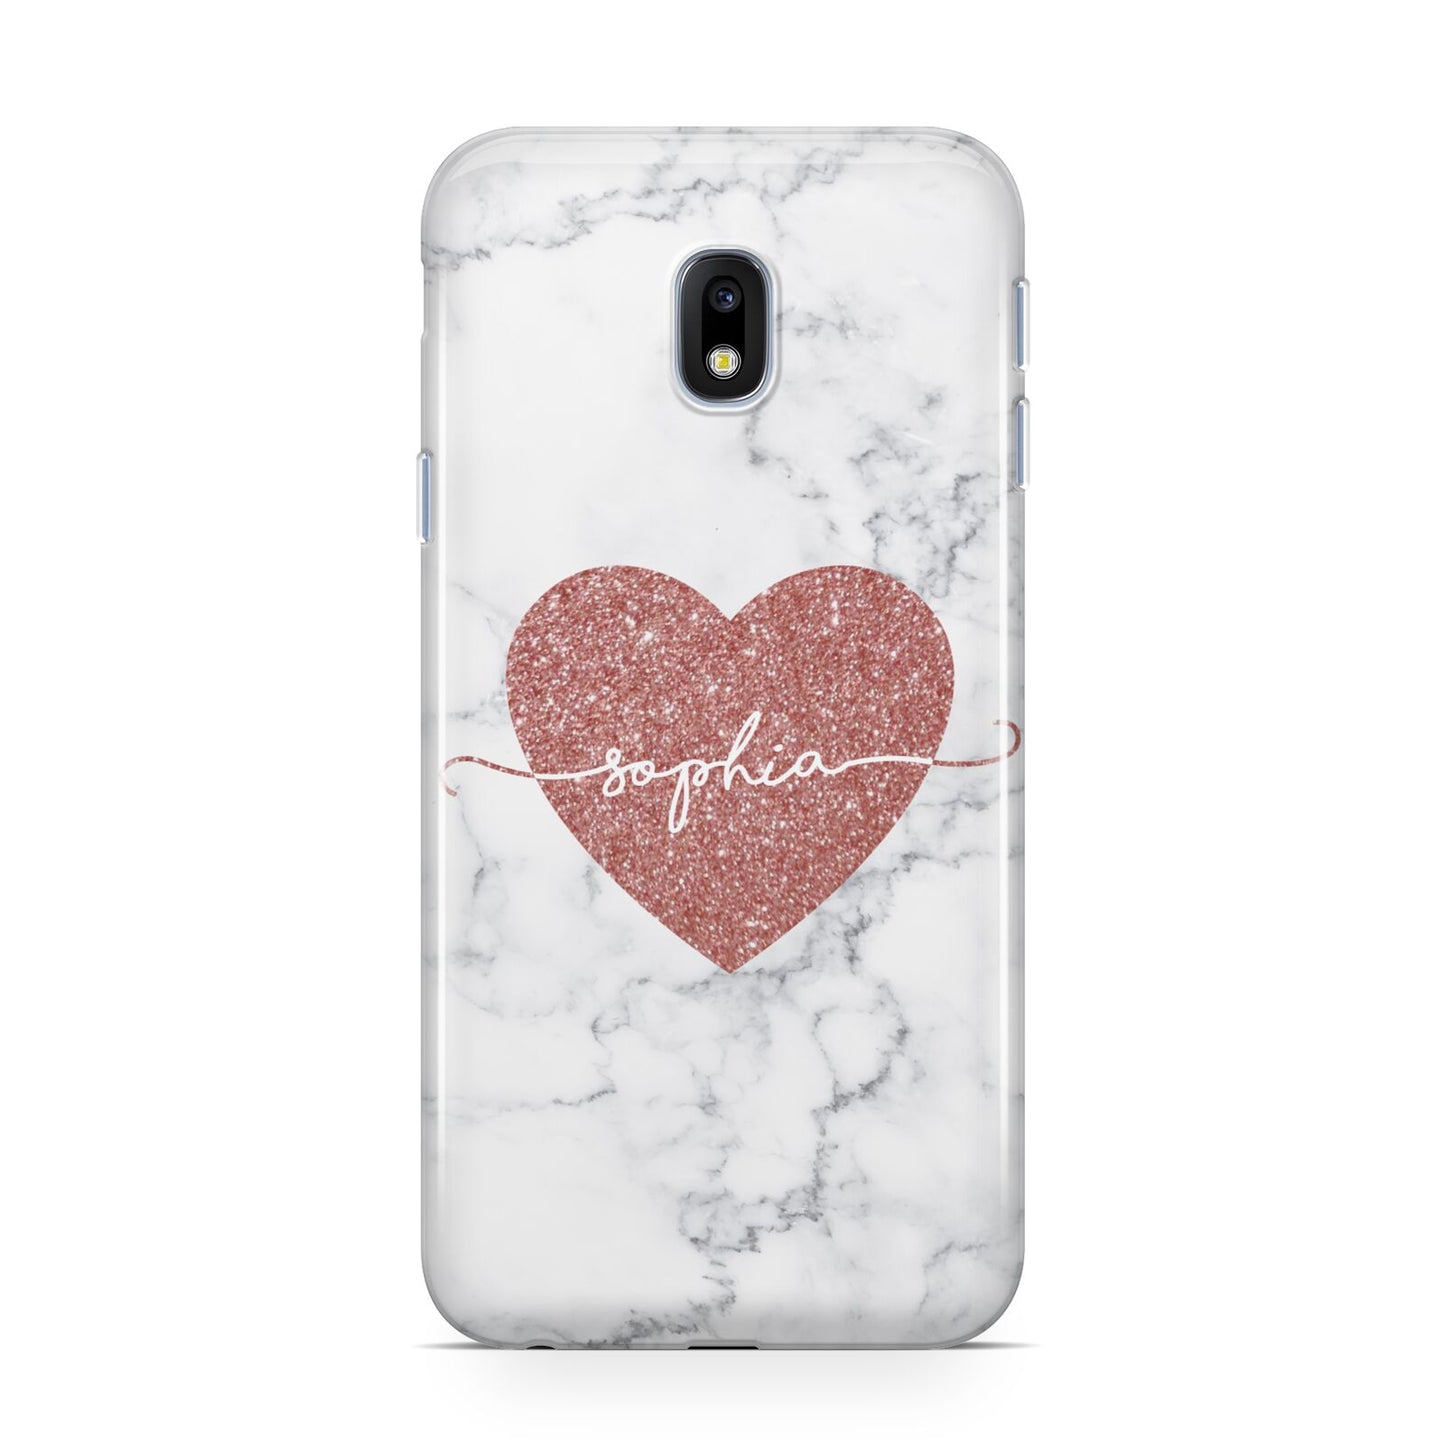 Marble Rose Gold Glitter Heart Personalised Name Samsung Galaxy J3 2017 Case